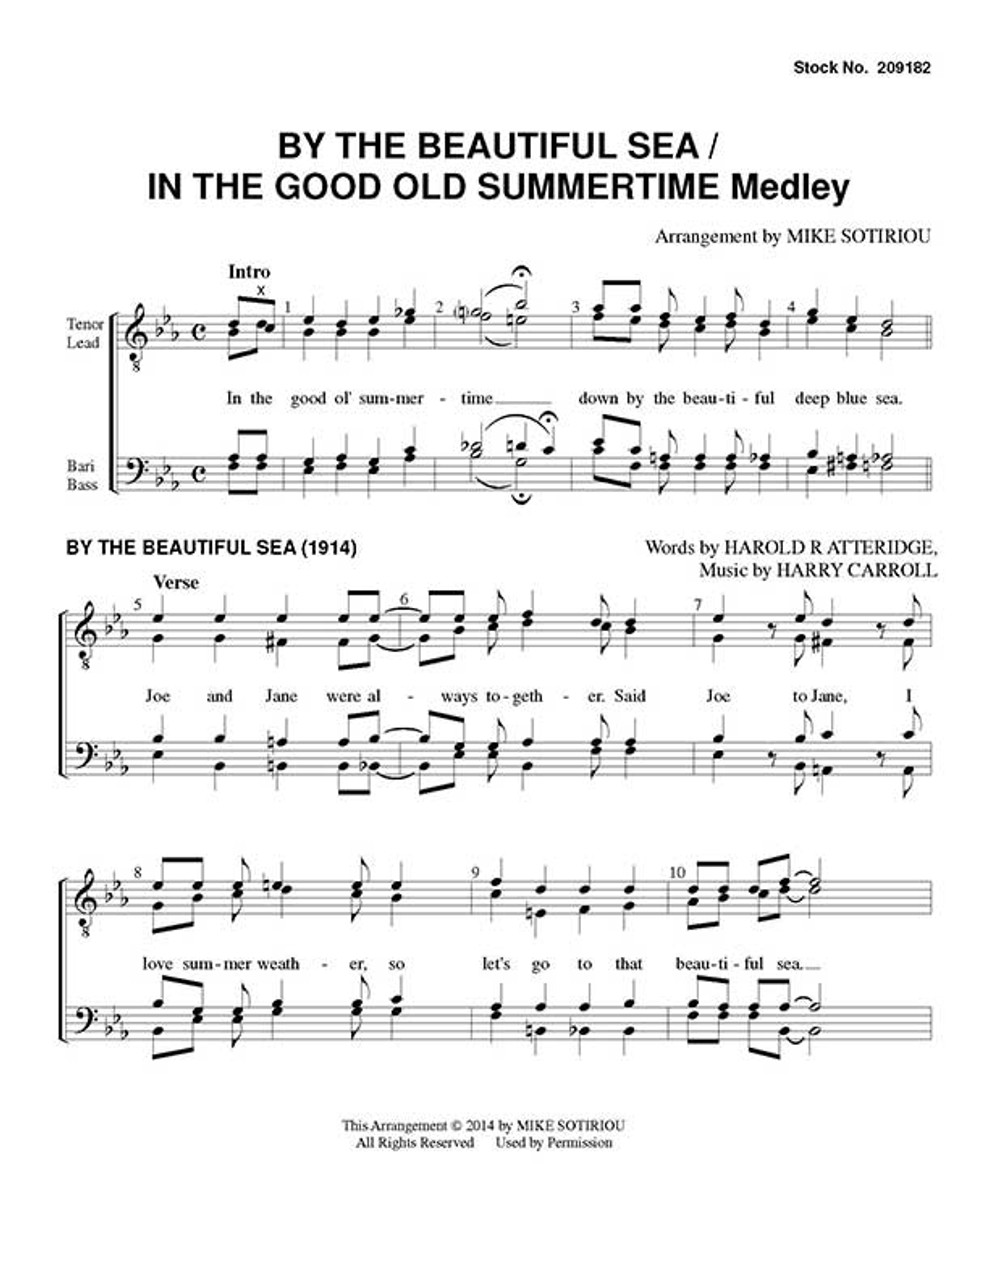 By The Beautiful Sea/In The Good Old Summertime (Medley) (TTBB) (arr. Mike Sotiriou)-UNPUB